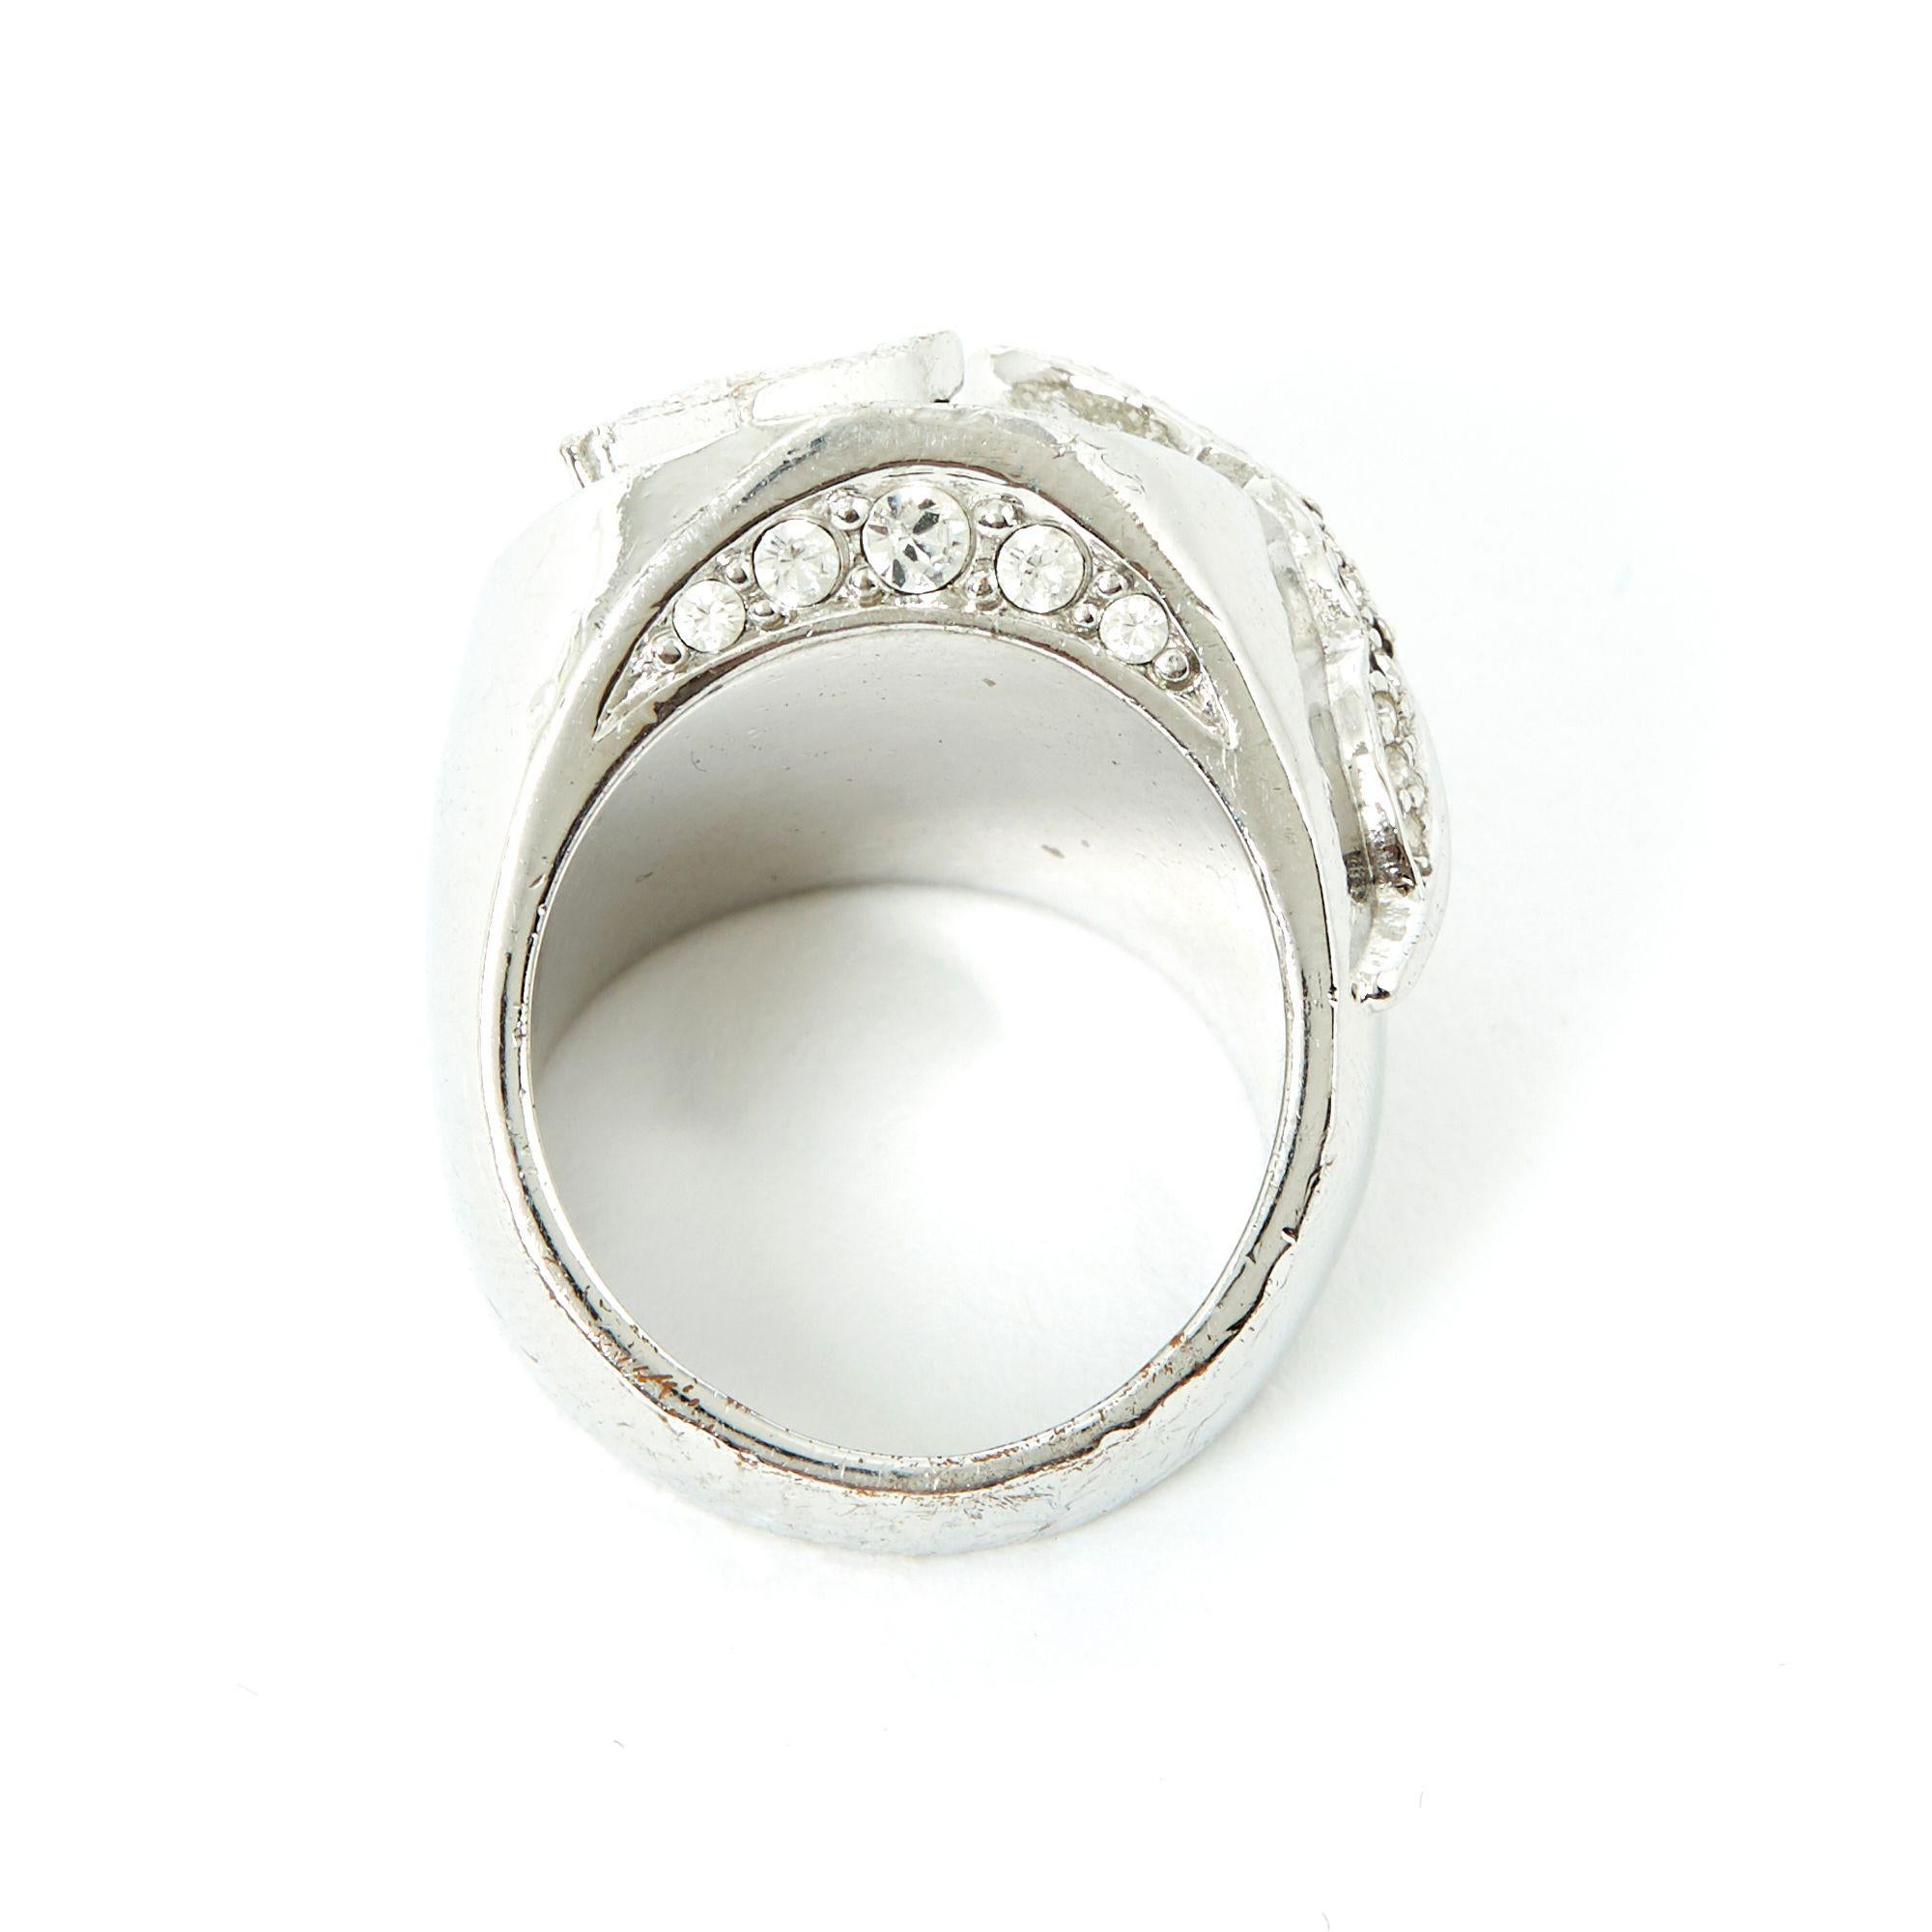 Dior signet ring in silver metal with a large oval central white rhinestone surrounded by rhinestones, topped with a Dior D paved with rhinestones and a feather also paved with rhinestones. Size indicated 6US or 52FR but measurements indicate 50FR,